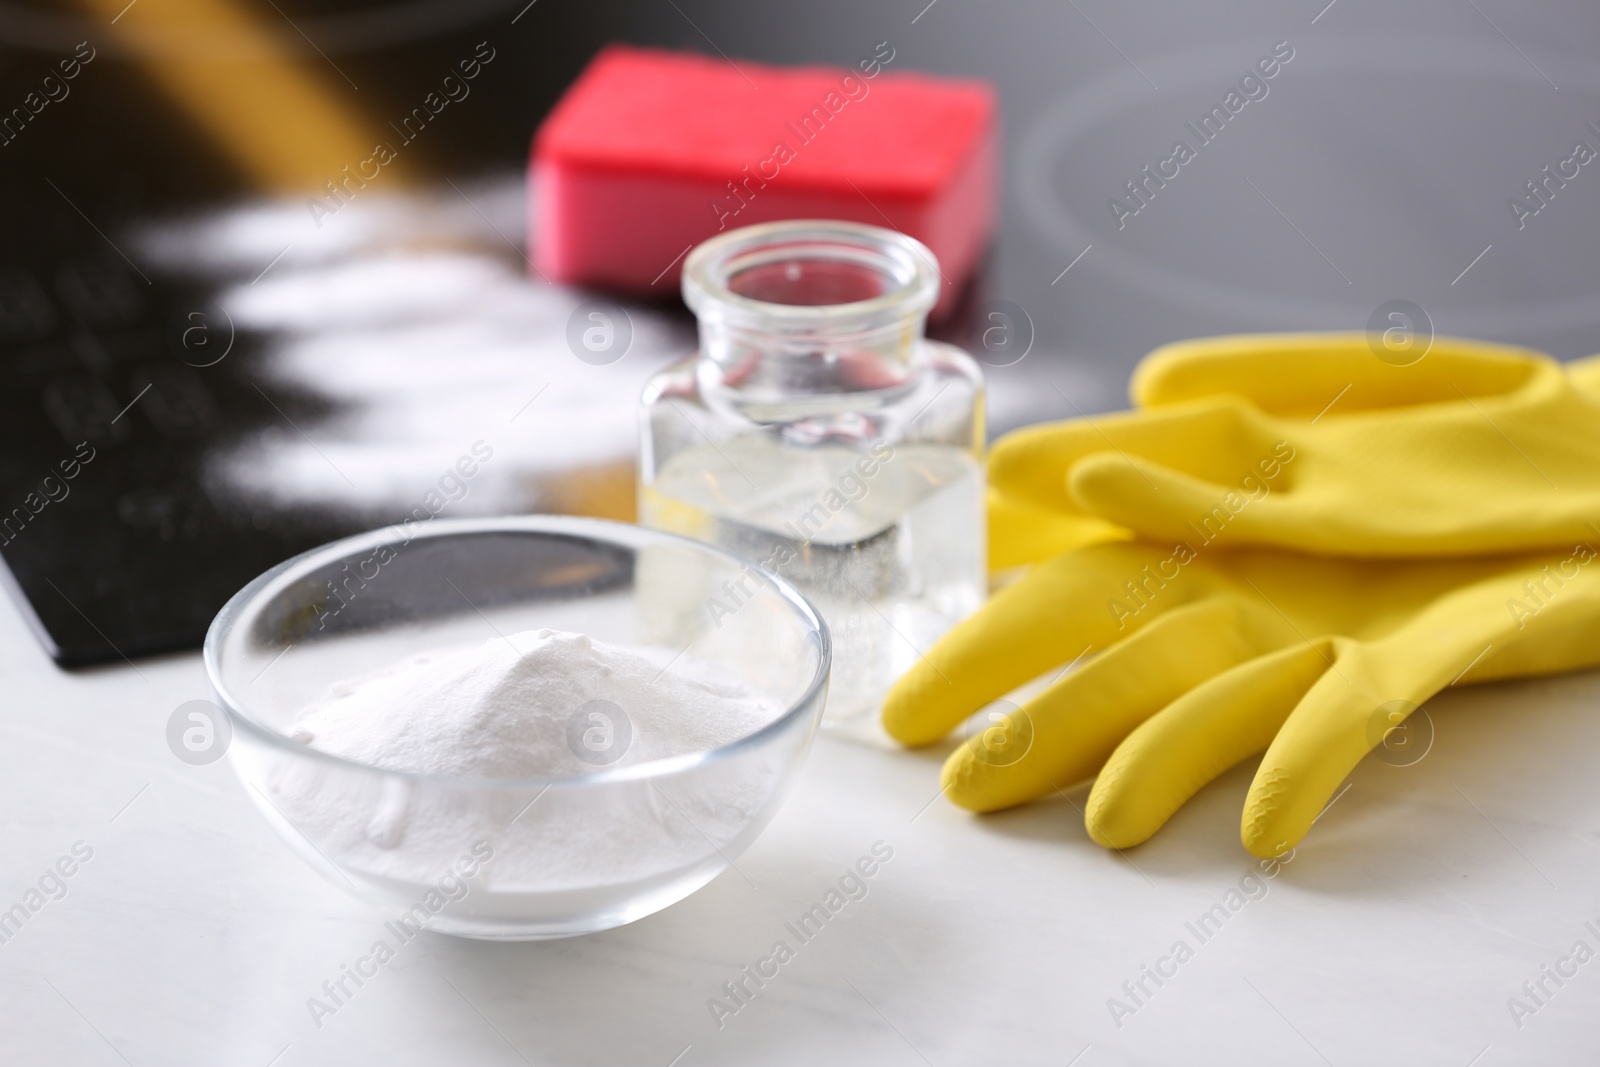 Photo of Baking soda, vinegar and gloves on white table. Eco friendly detergent